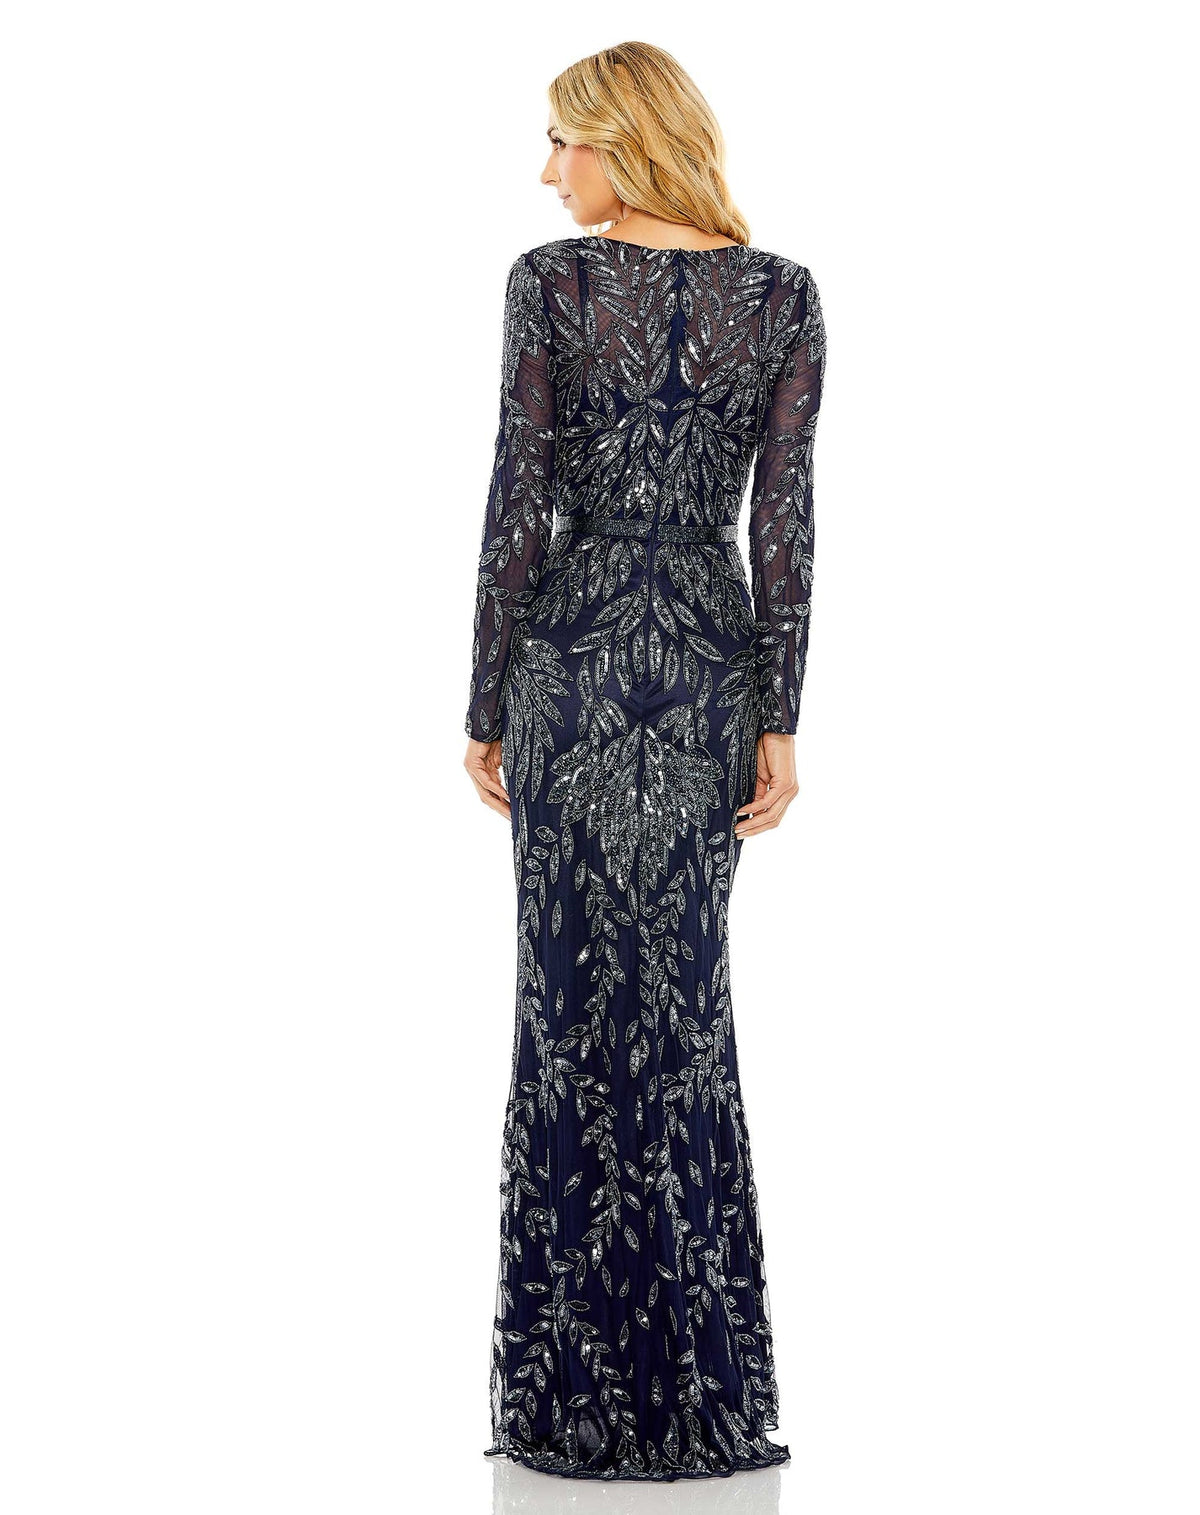 MAC DUGGAL, LONG SLEEVE ILLUSION NECKLINE EMBELLISHED GOWN, Style #6023, MIDNIGHT BLUE, MODEST GOWN BACK VIEW